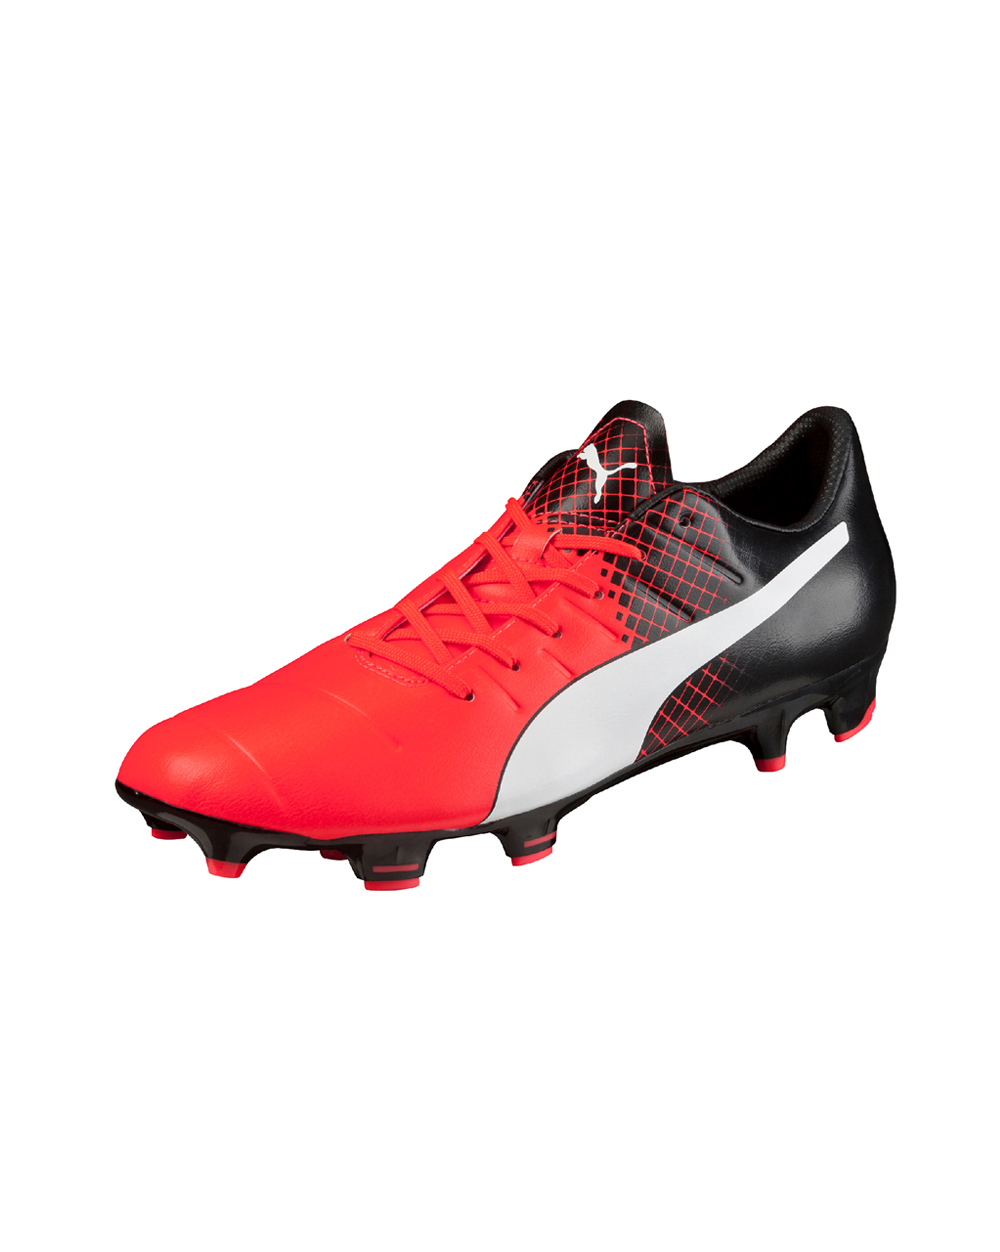 botines puma evopower 4 buy clothes shoes online